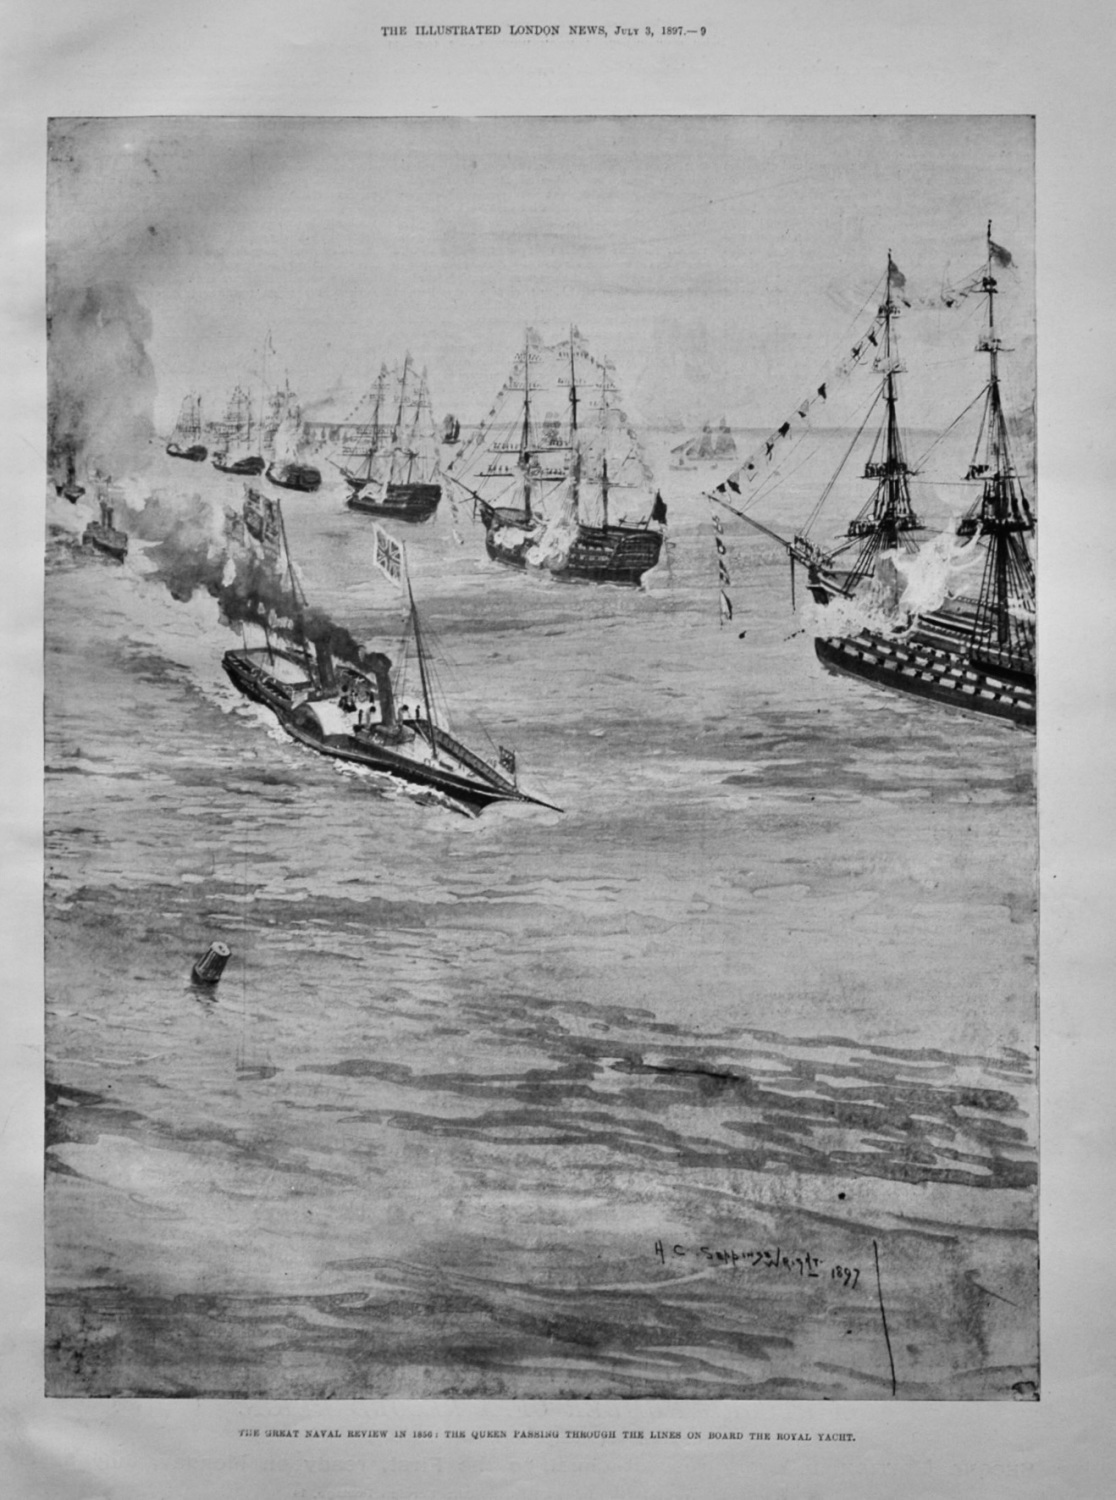 The Great Naval Review in 1856 :  The Queen Passing through the Lines on Bo